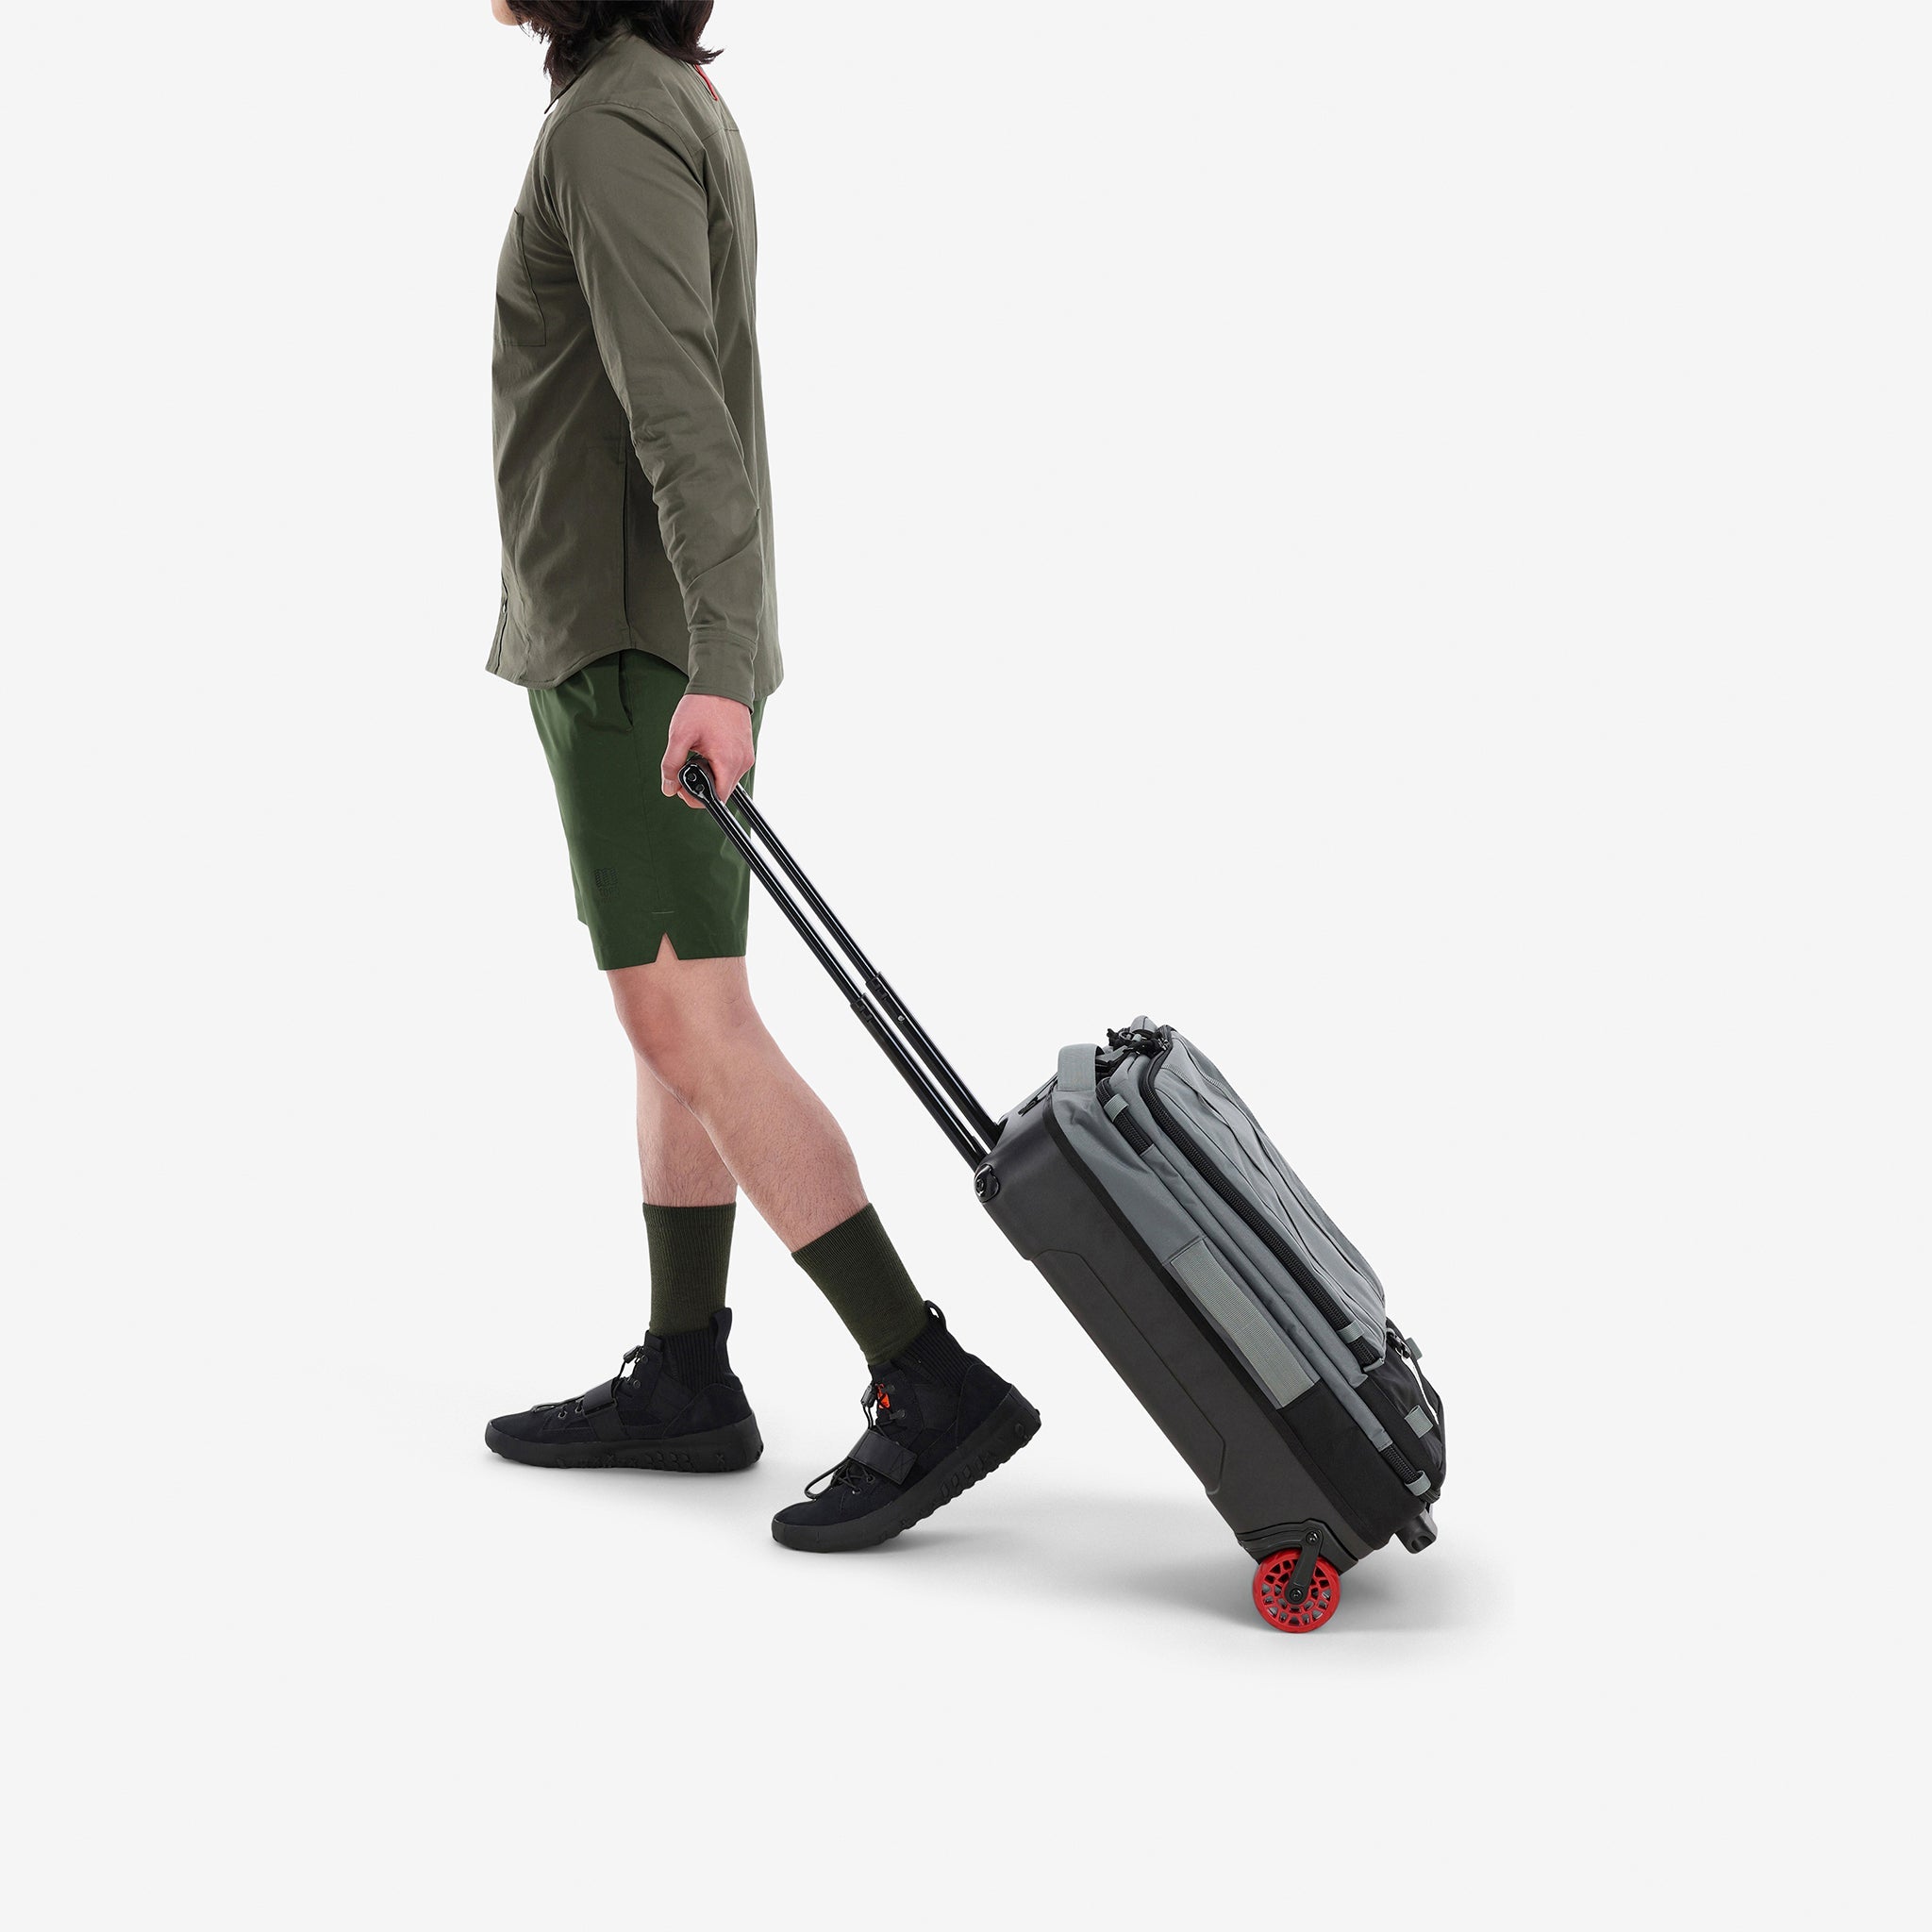 Rolling Luggage: Rolling Suitcases & Travel Bags with Wheels